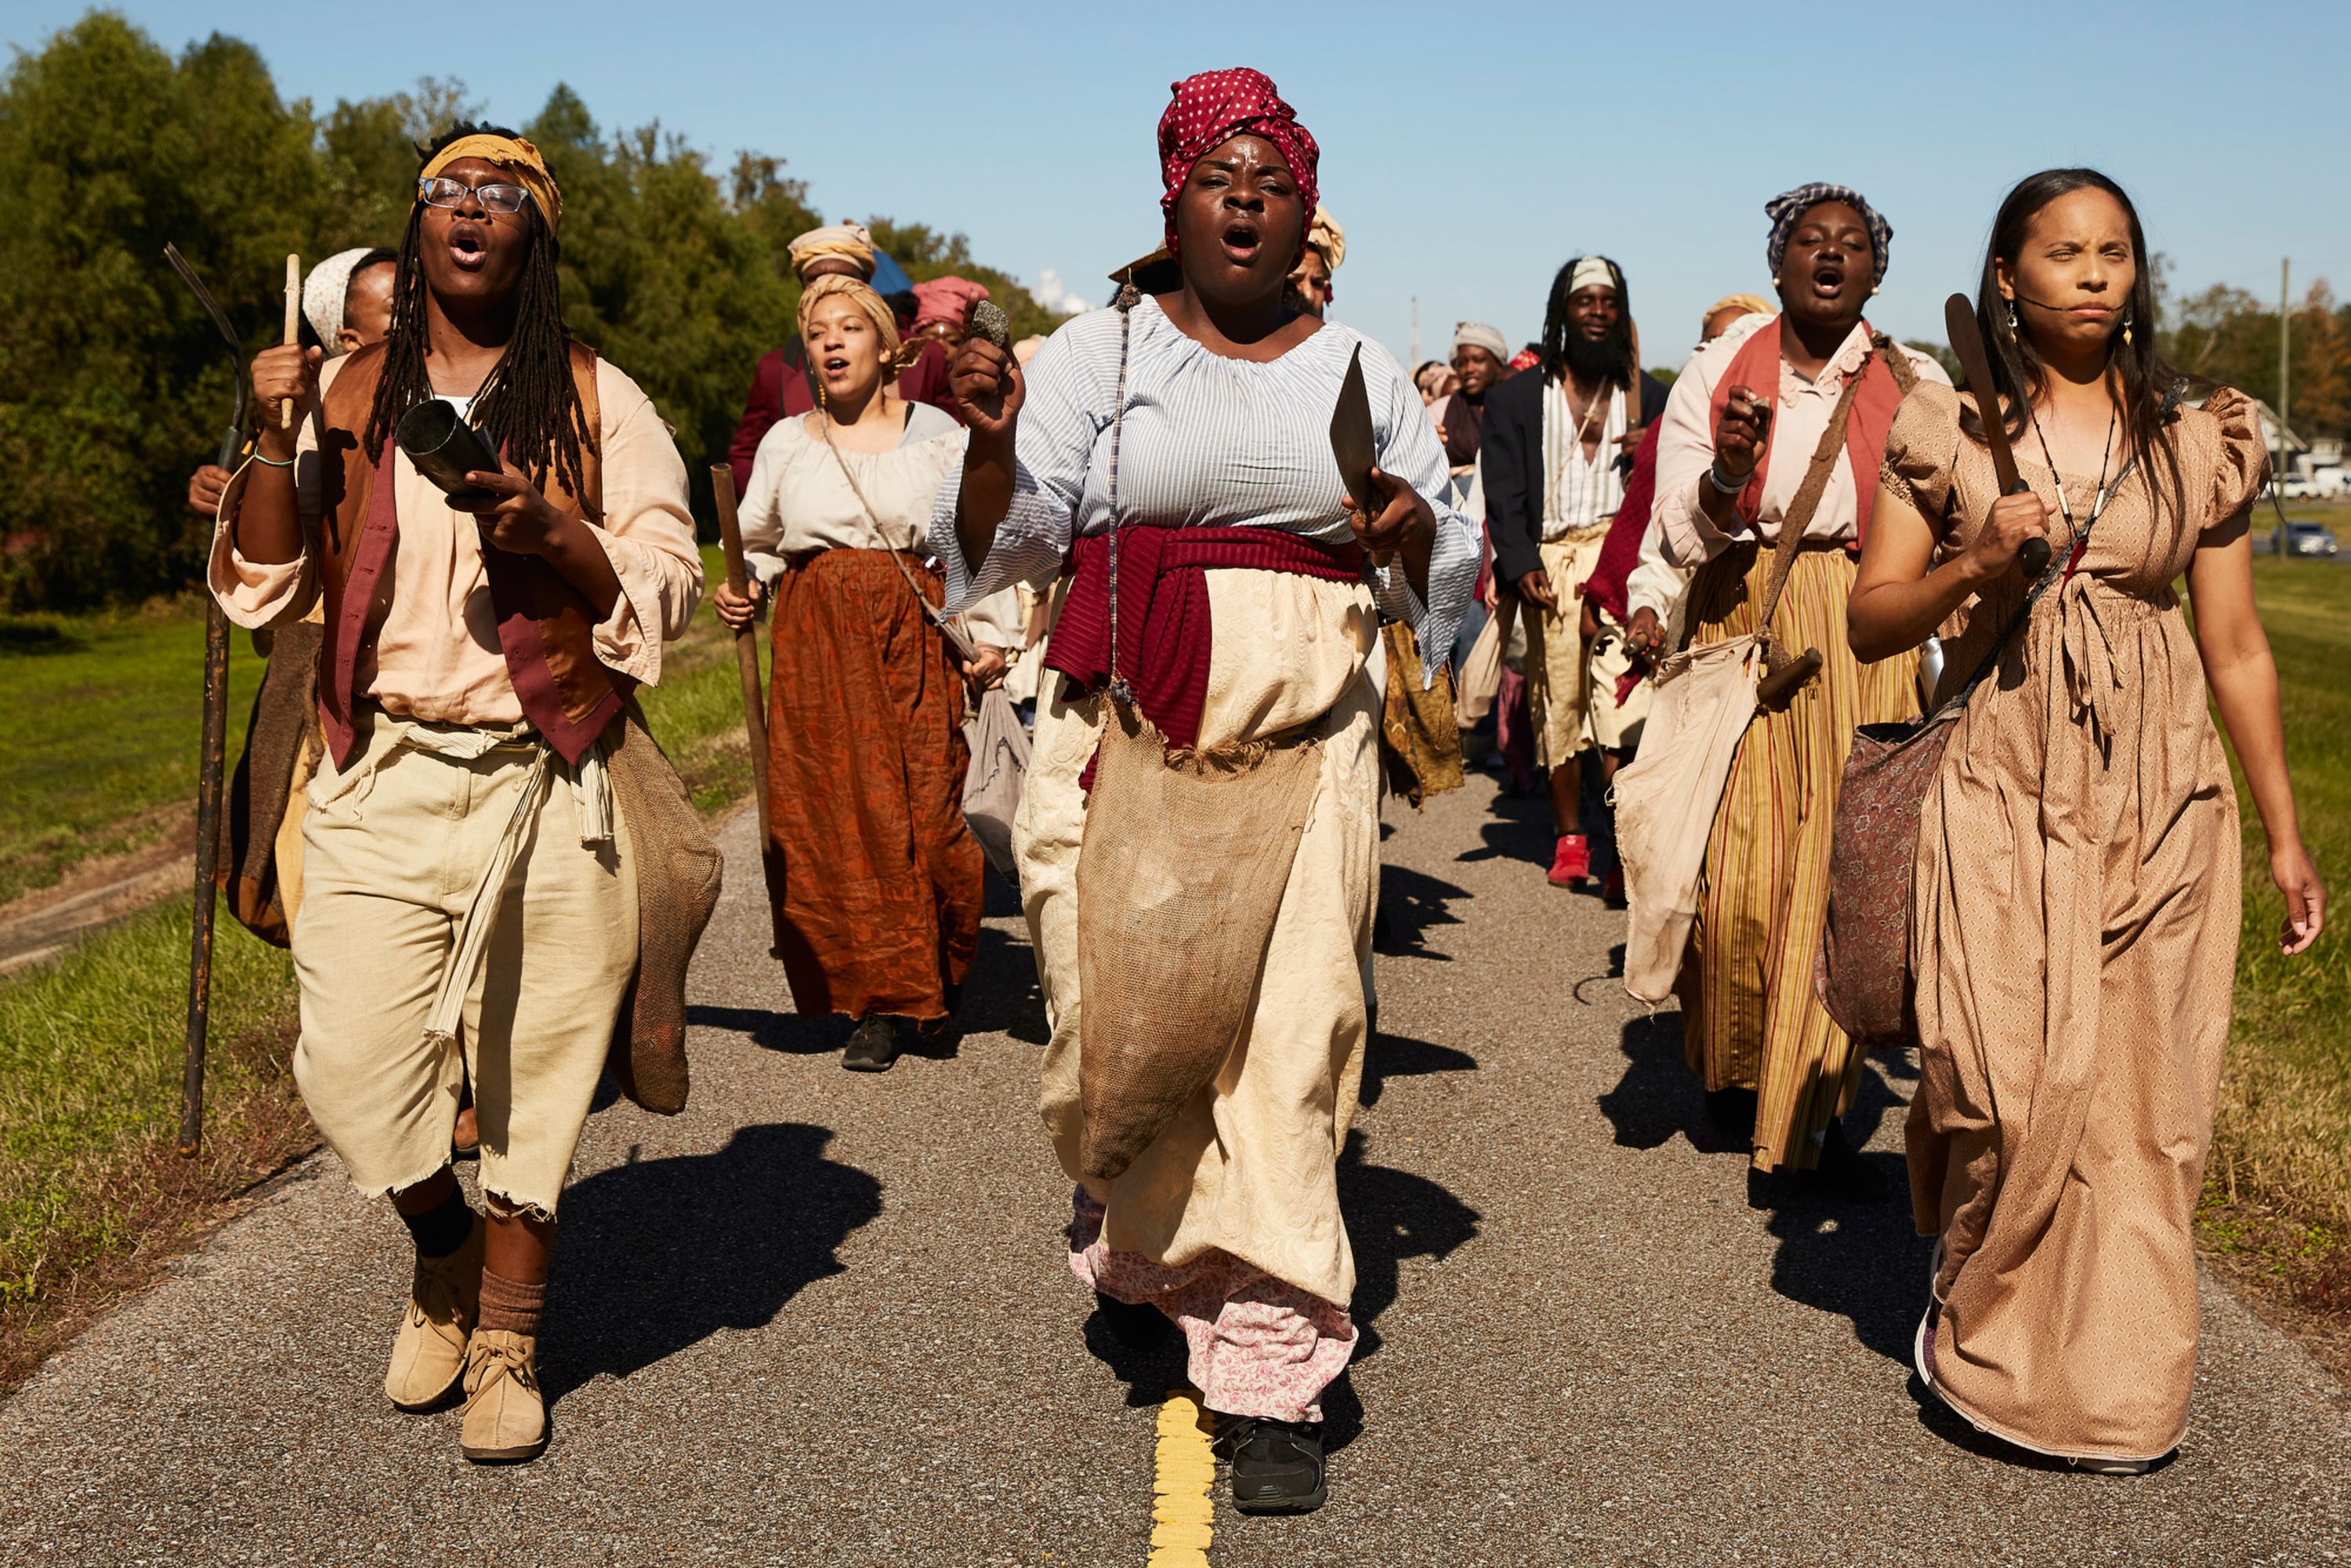 Marching atop the Mississippi River levee in New Sarpy, Louisiana, on Saturday, March 9, reenactors chant, "On to New Orleans, freedom or death -- we're going to end slavery."